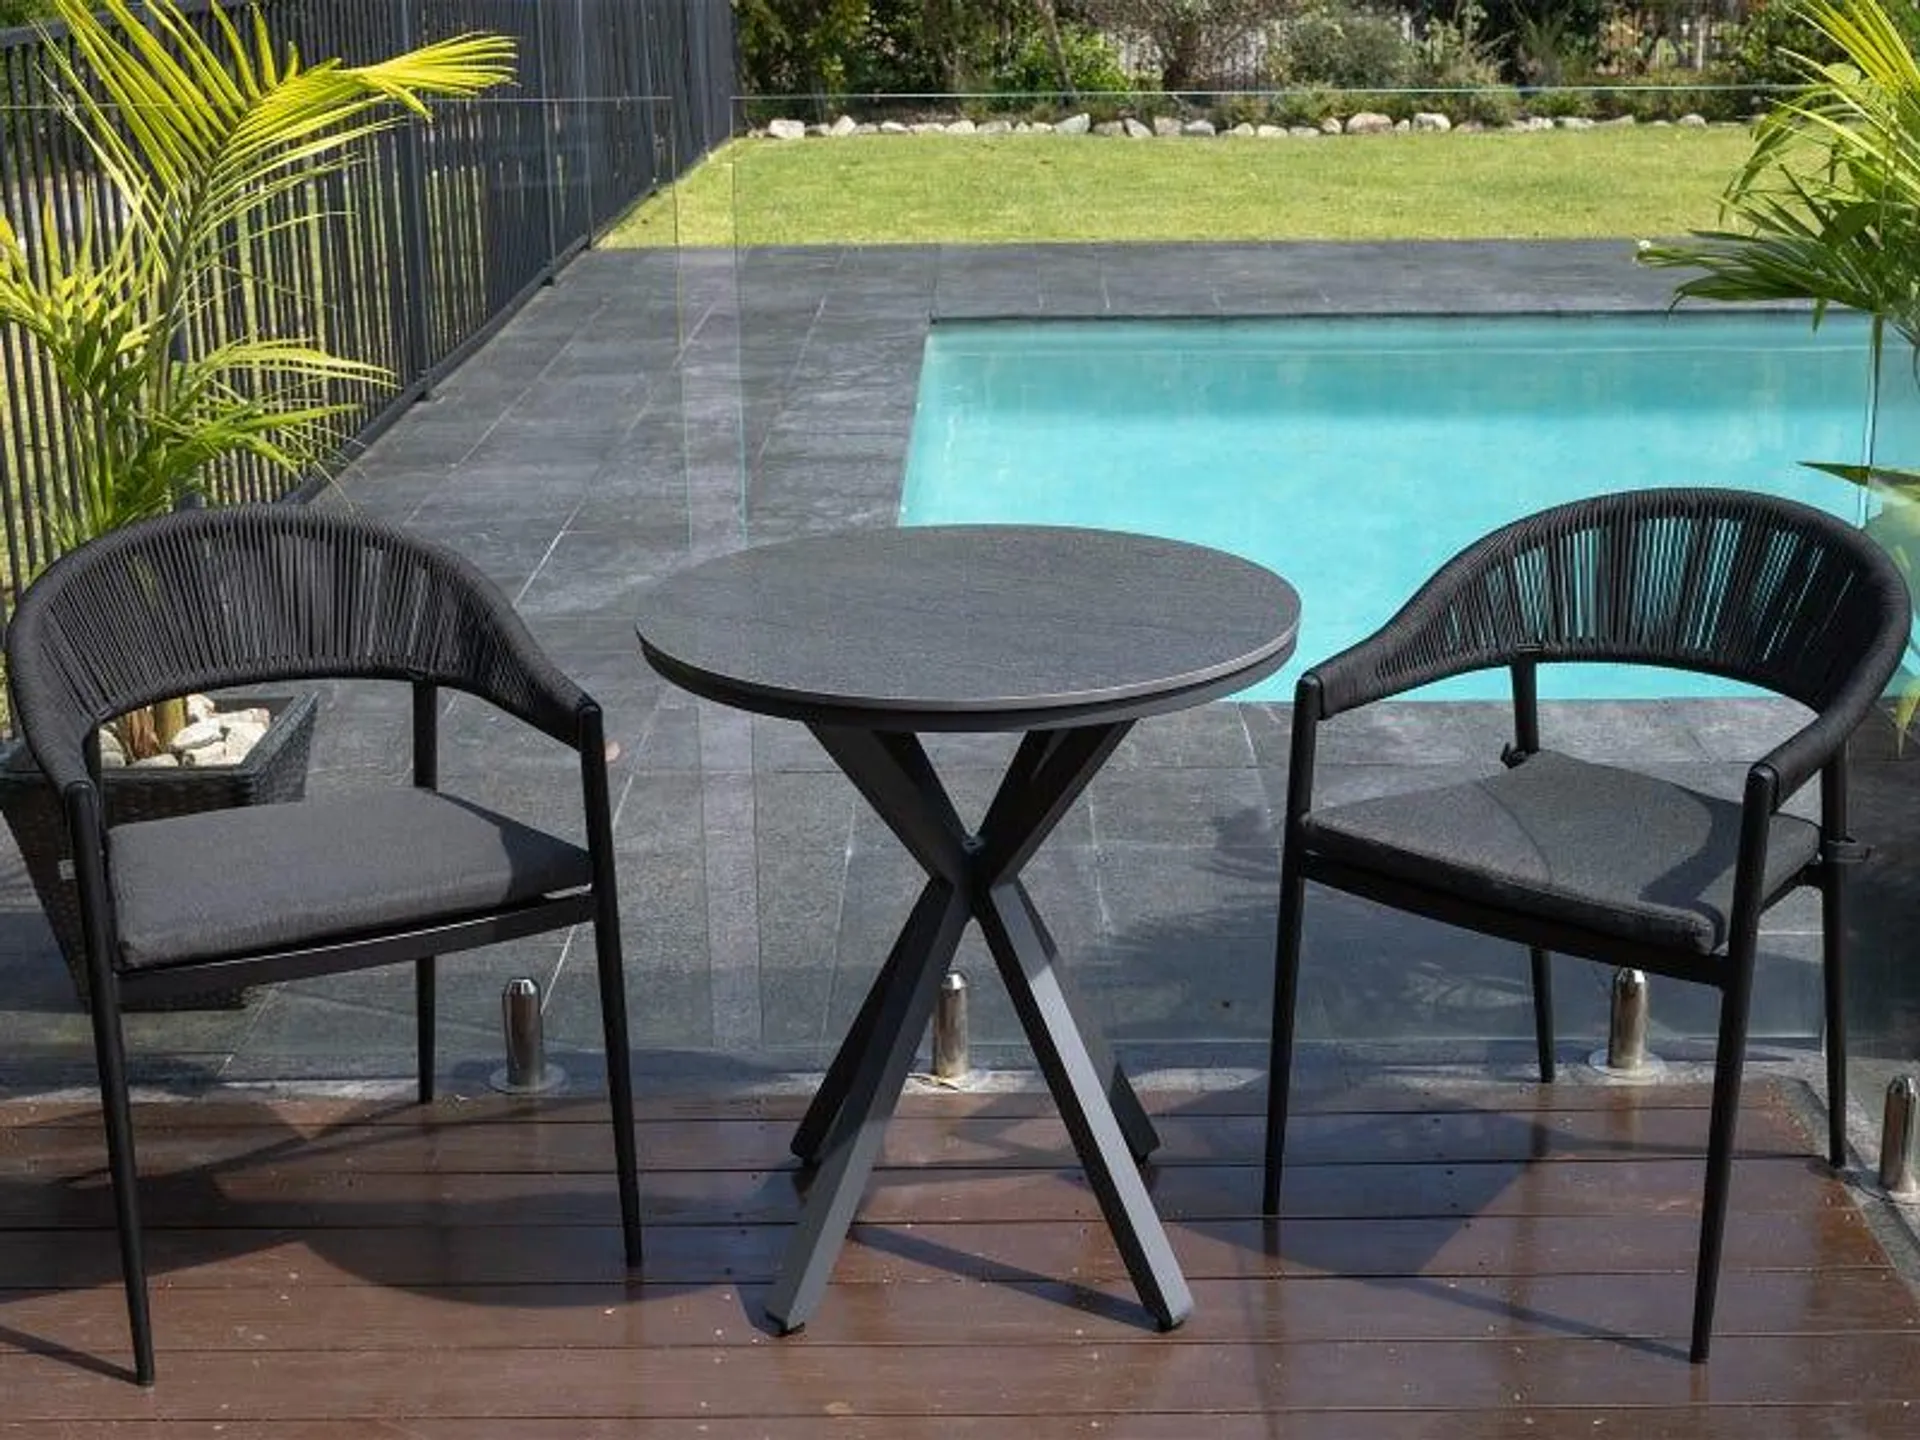 Adele Round Ceramic Table with Nivala Chairs 3pc Outdoor Dining Setting